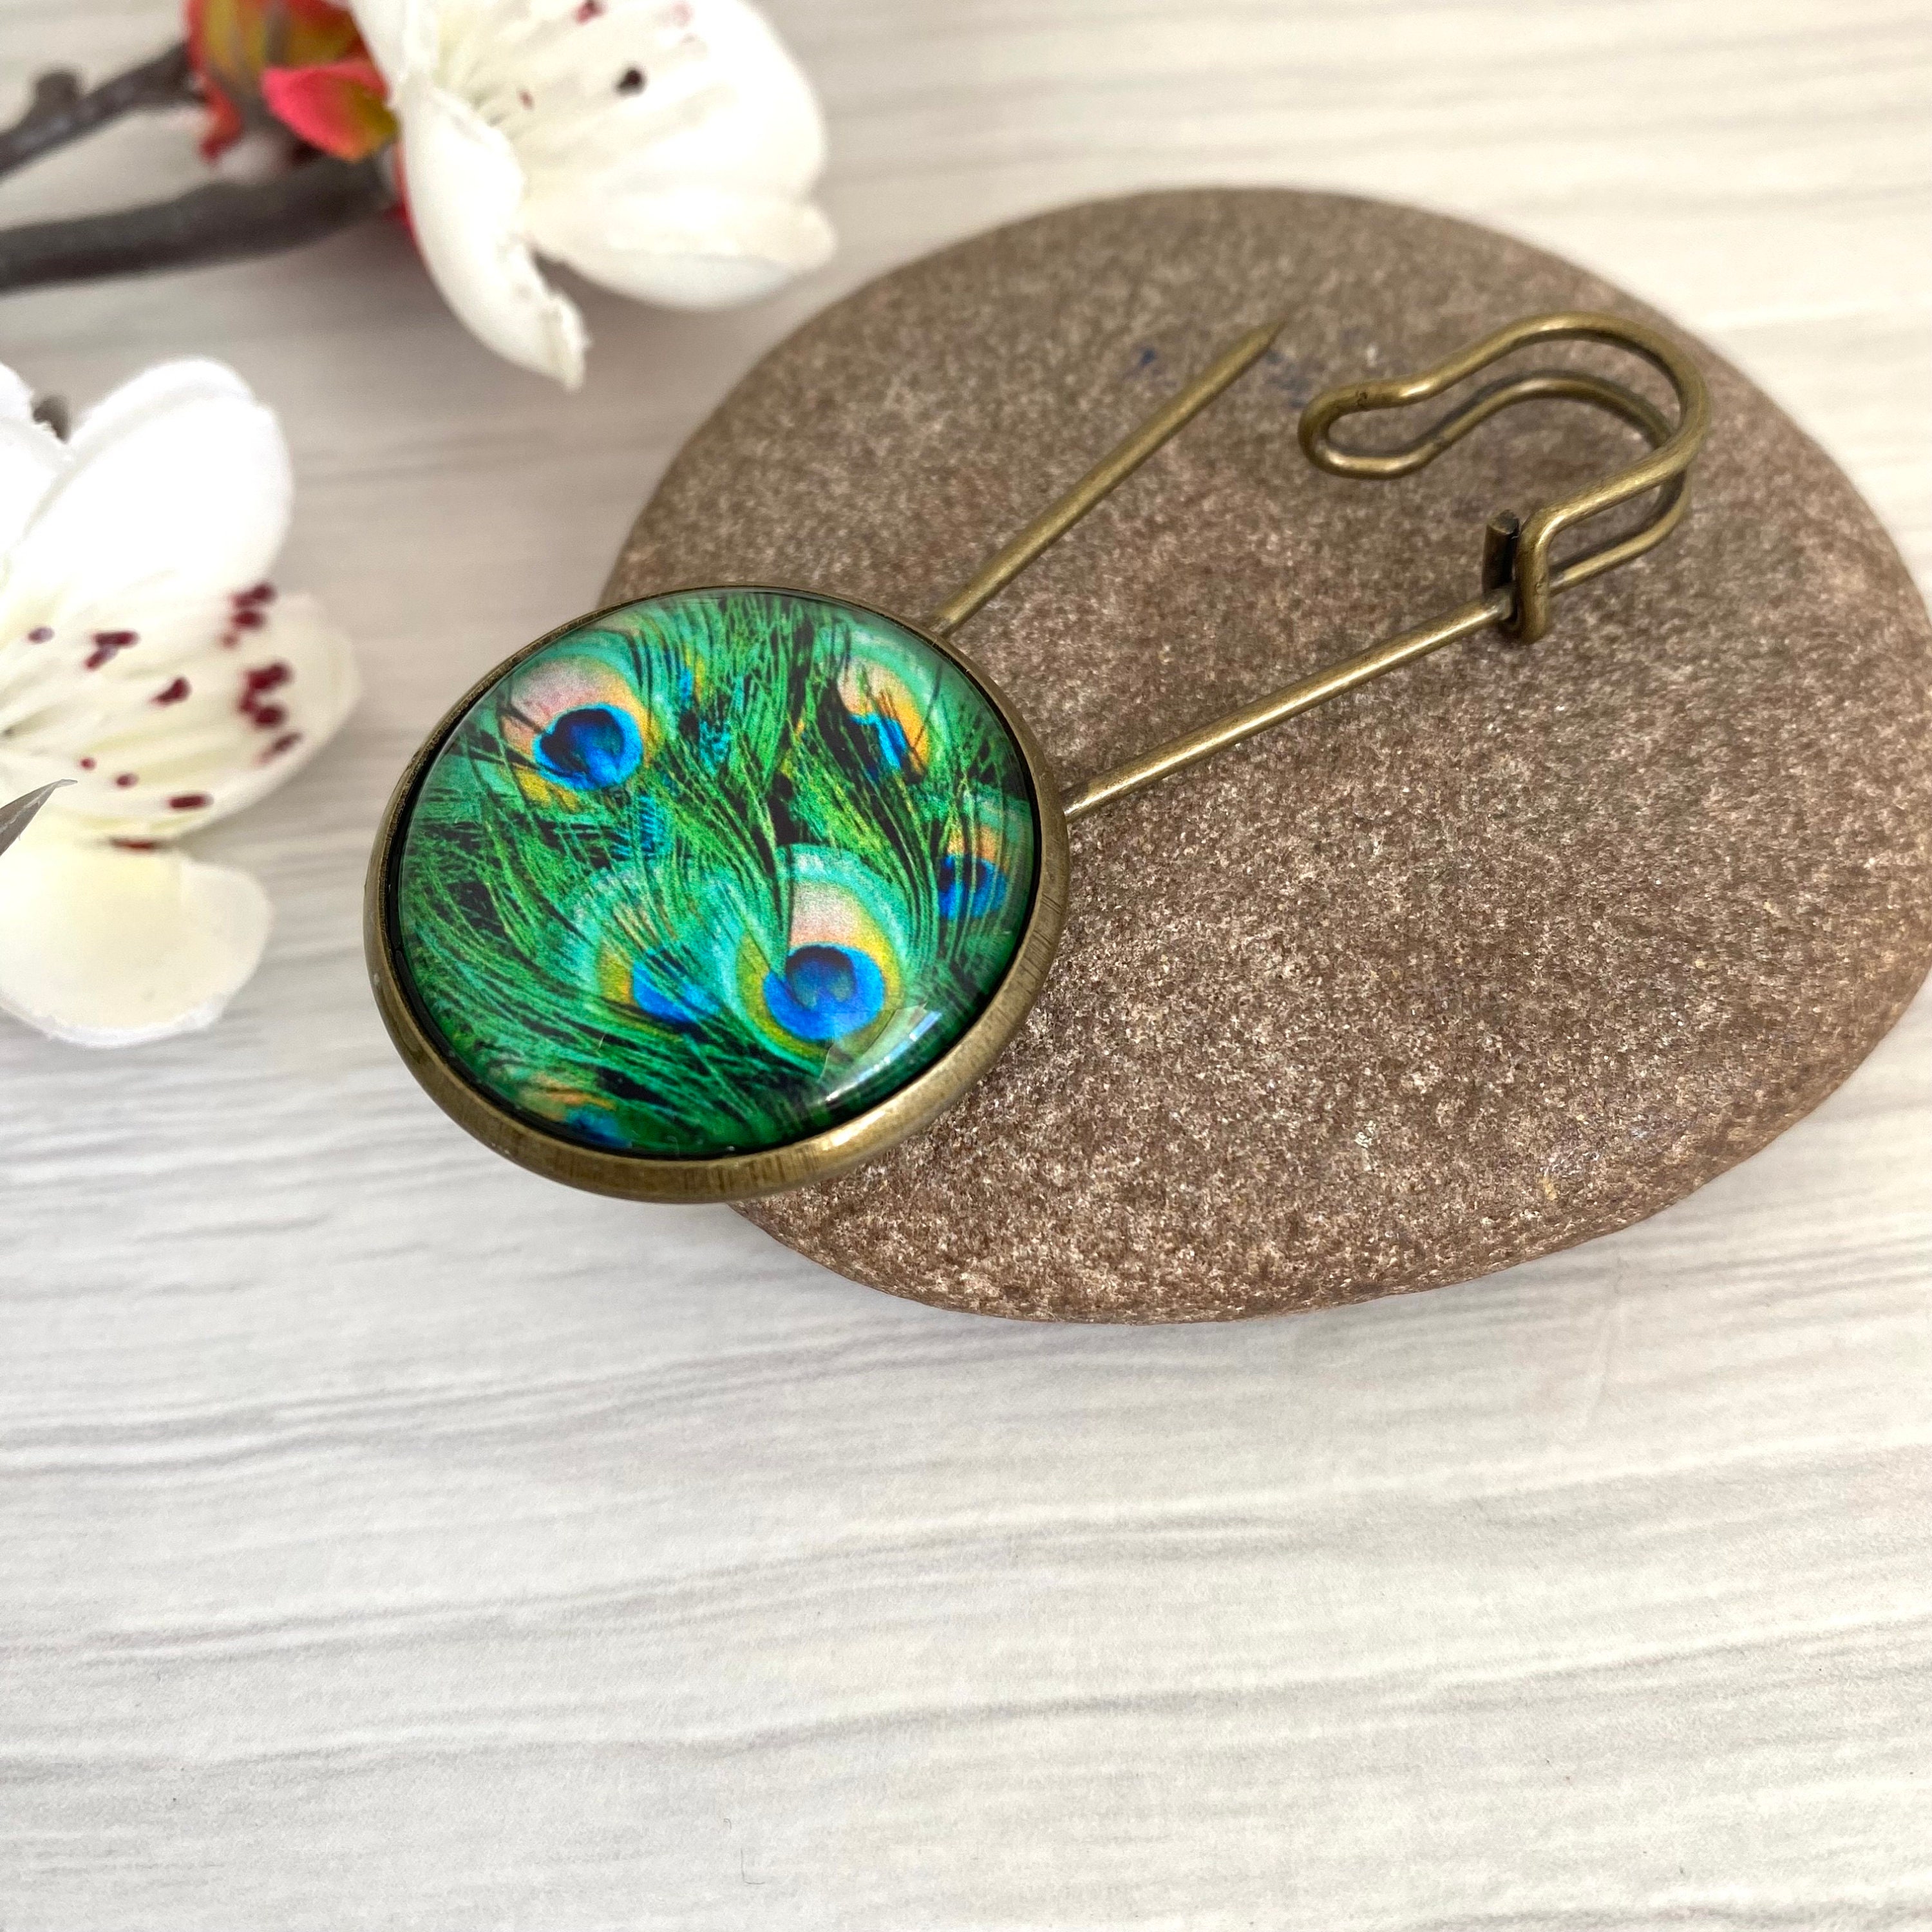 Metal Shawl Pin With Fossil Detail, Ammonite Kilt Pin, Picture Scarf Pin,  Emerald Green Brooch, Brooches for Women in the UK, Cabochon Pin 